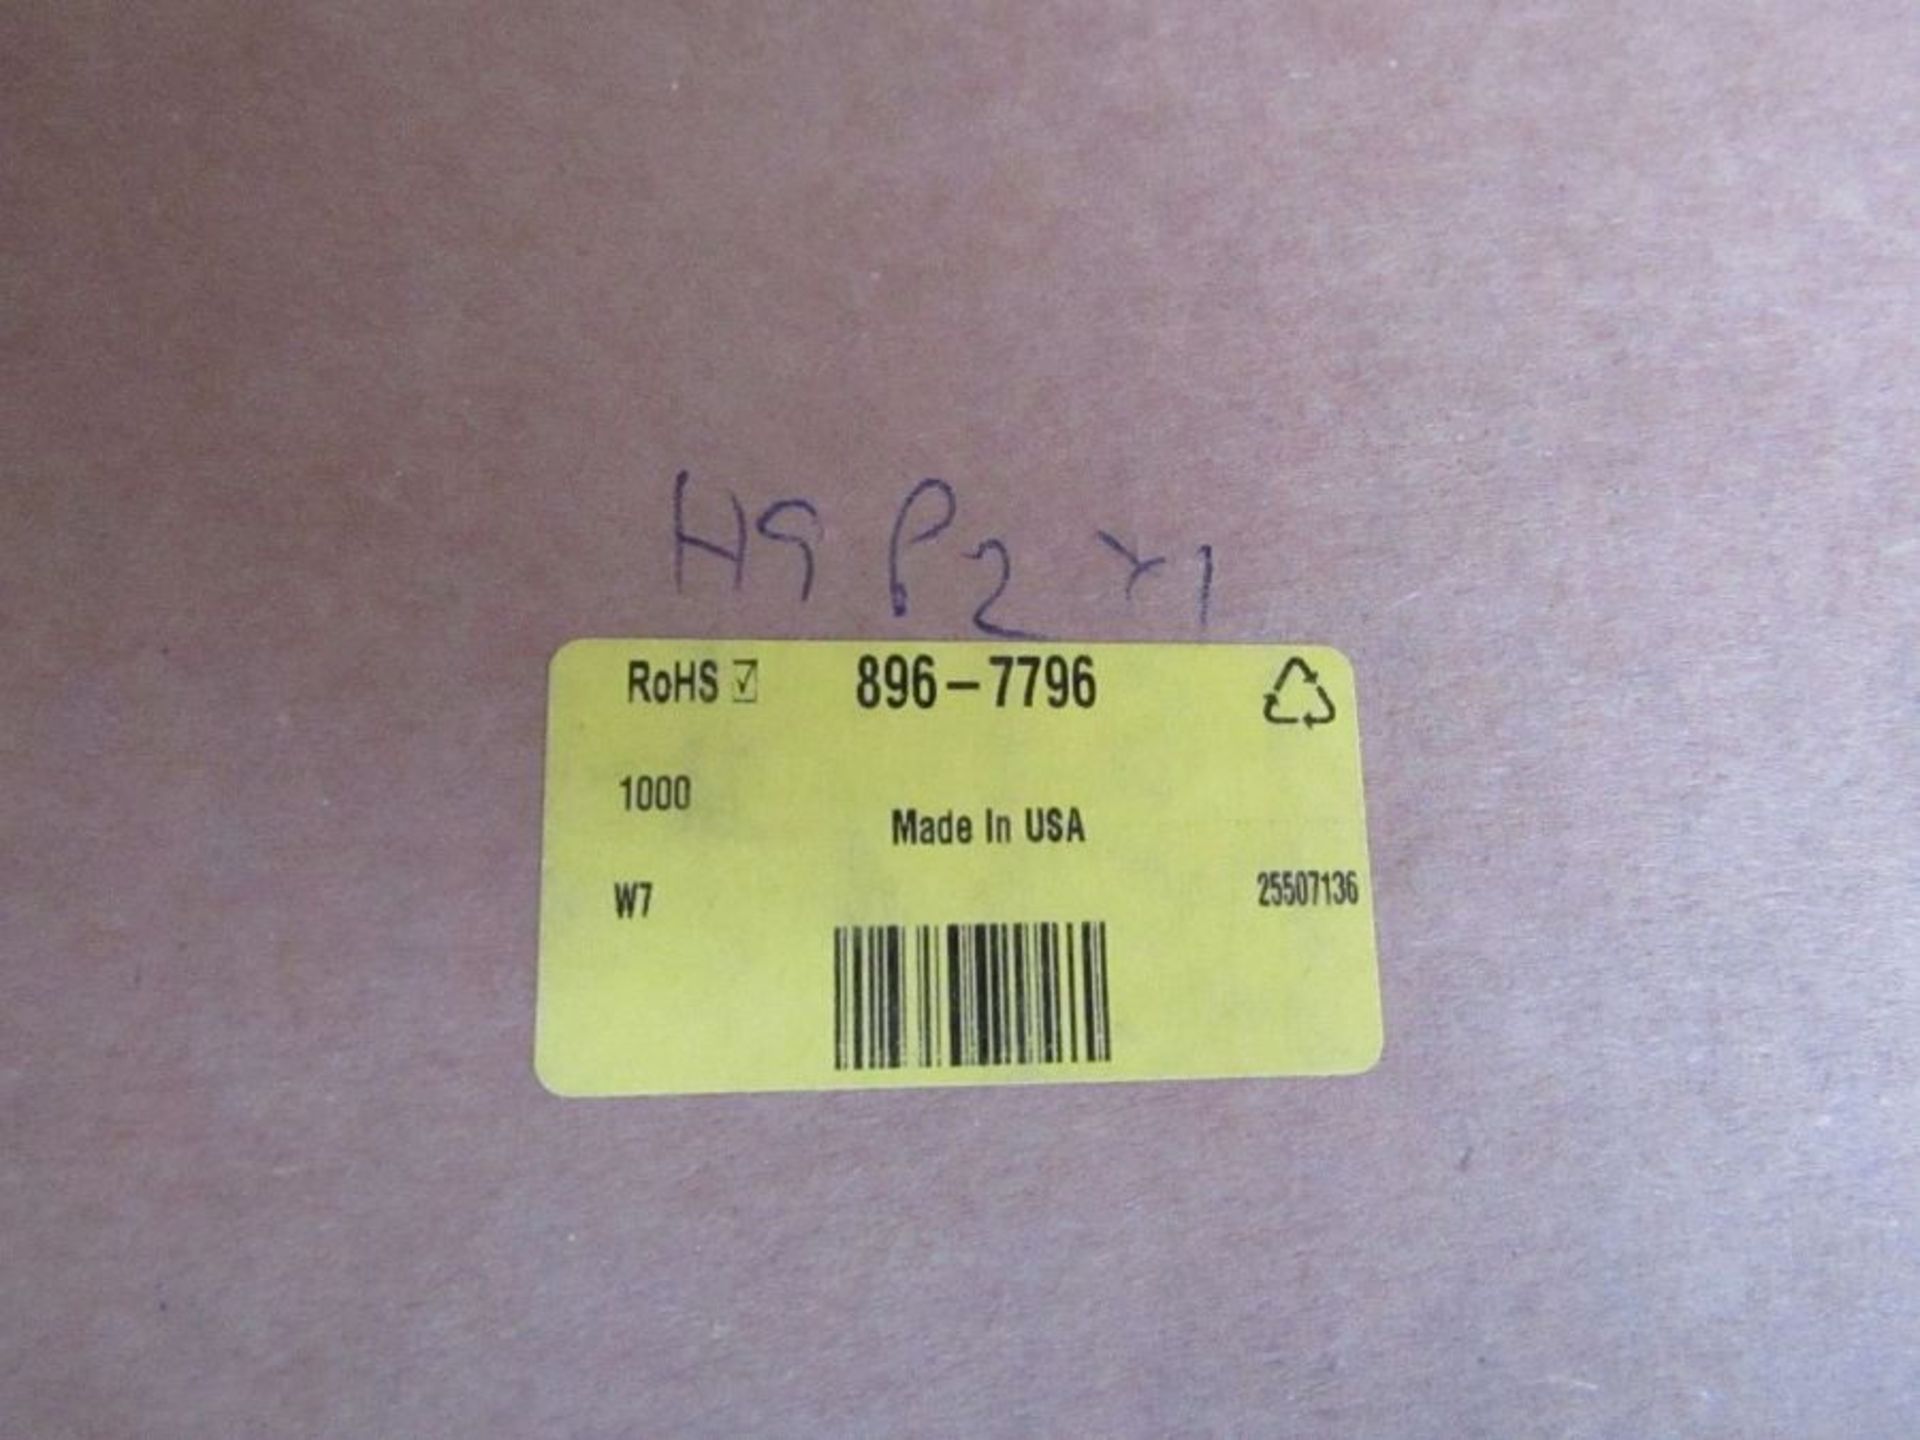 Box of 1000 TE Connectivity D-SCE Heat Shrink Cable Marker Yellow 1005fc 8967796 - Image 3 of 3